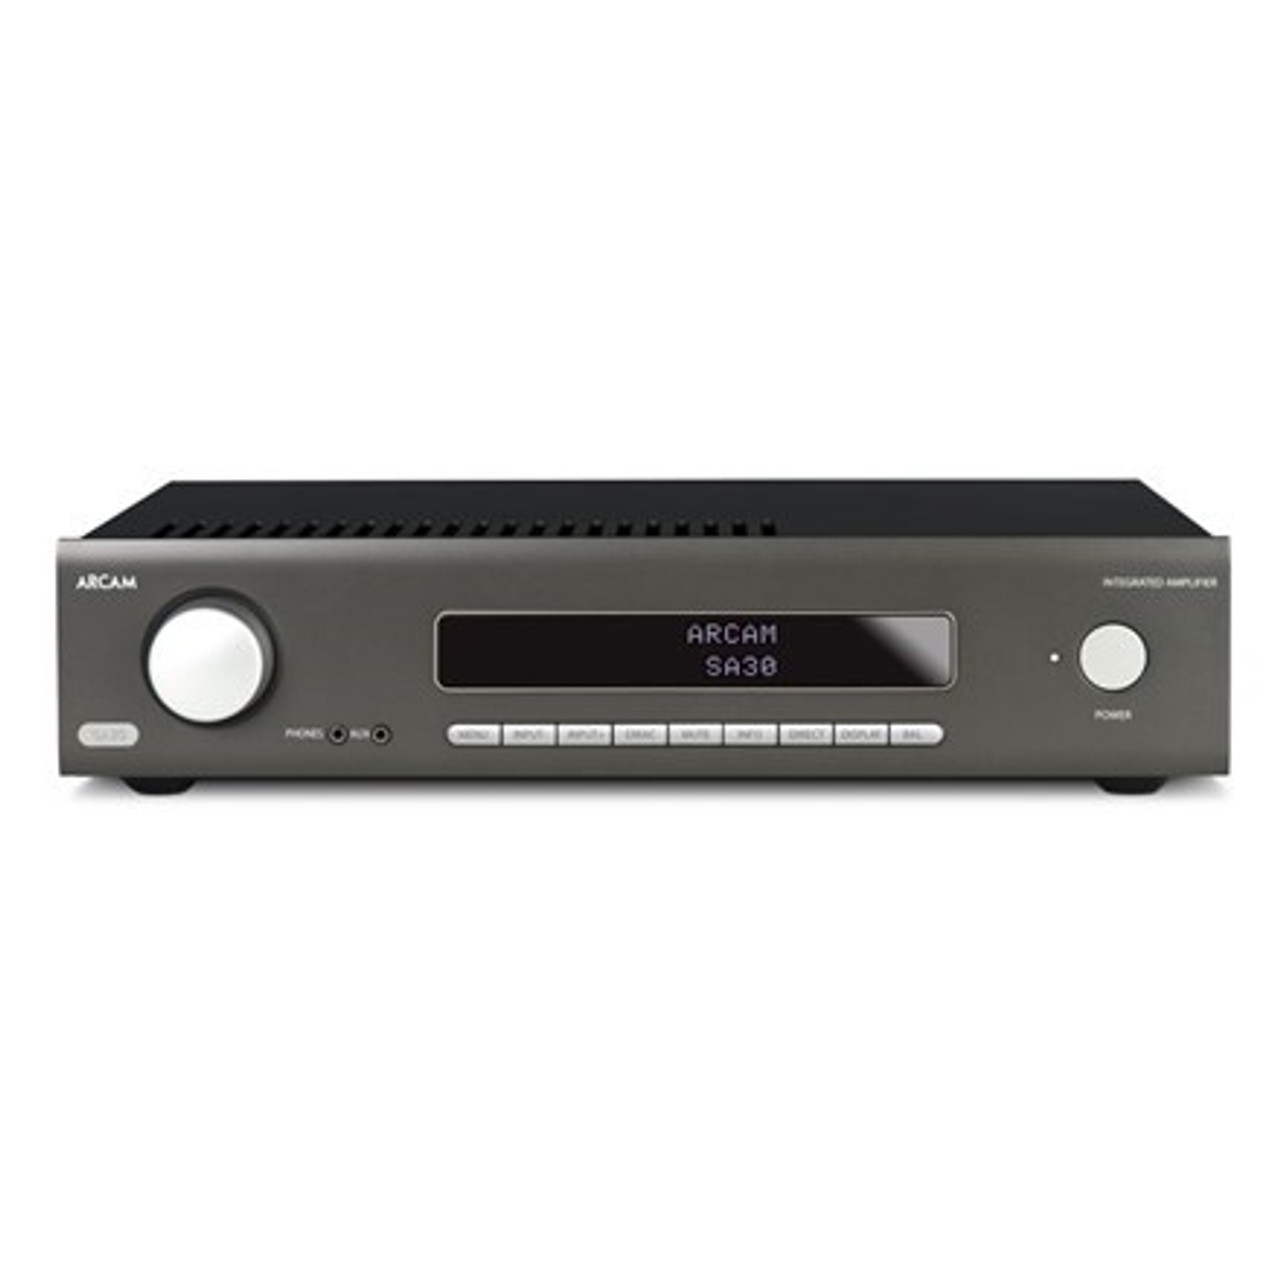 Solve Arcam Sa30 Problems with These Expert Tips.